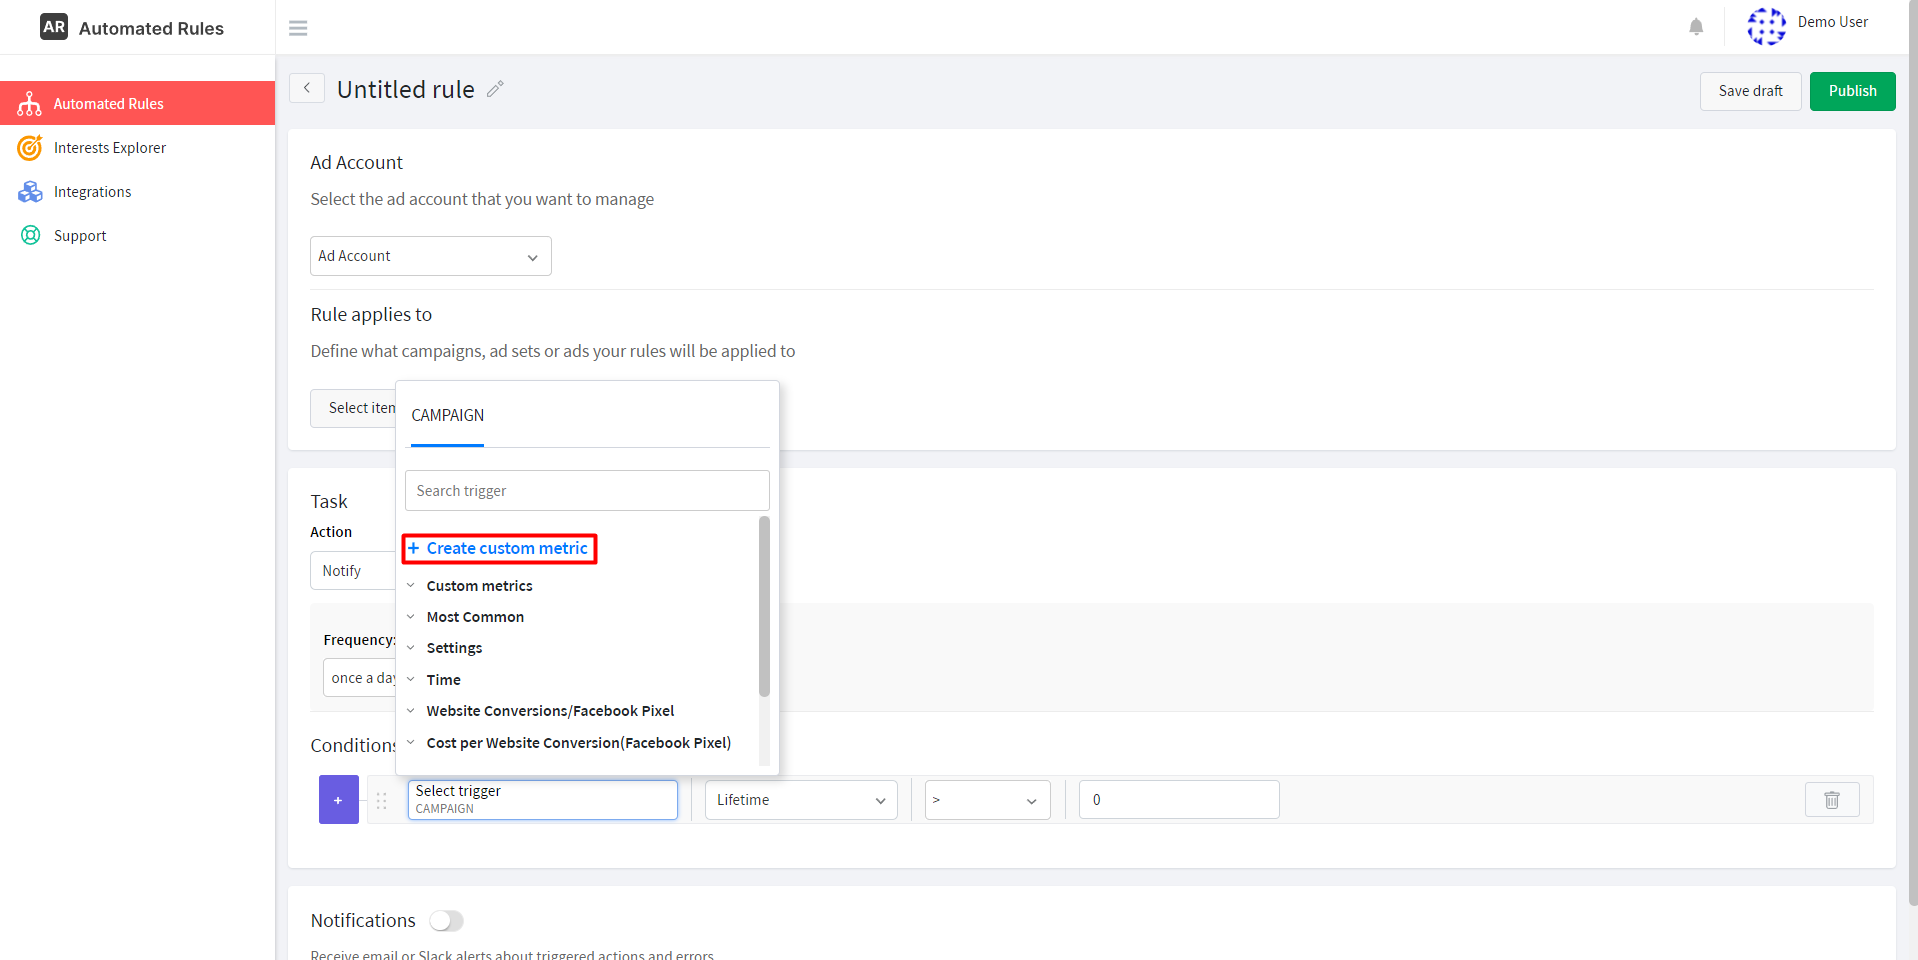 Creating custom metrics for Facebook ads in the AutomatedRules interface